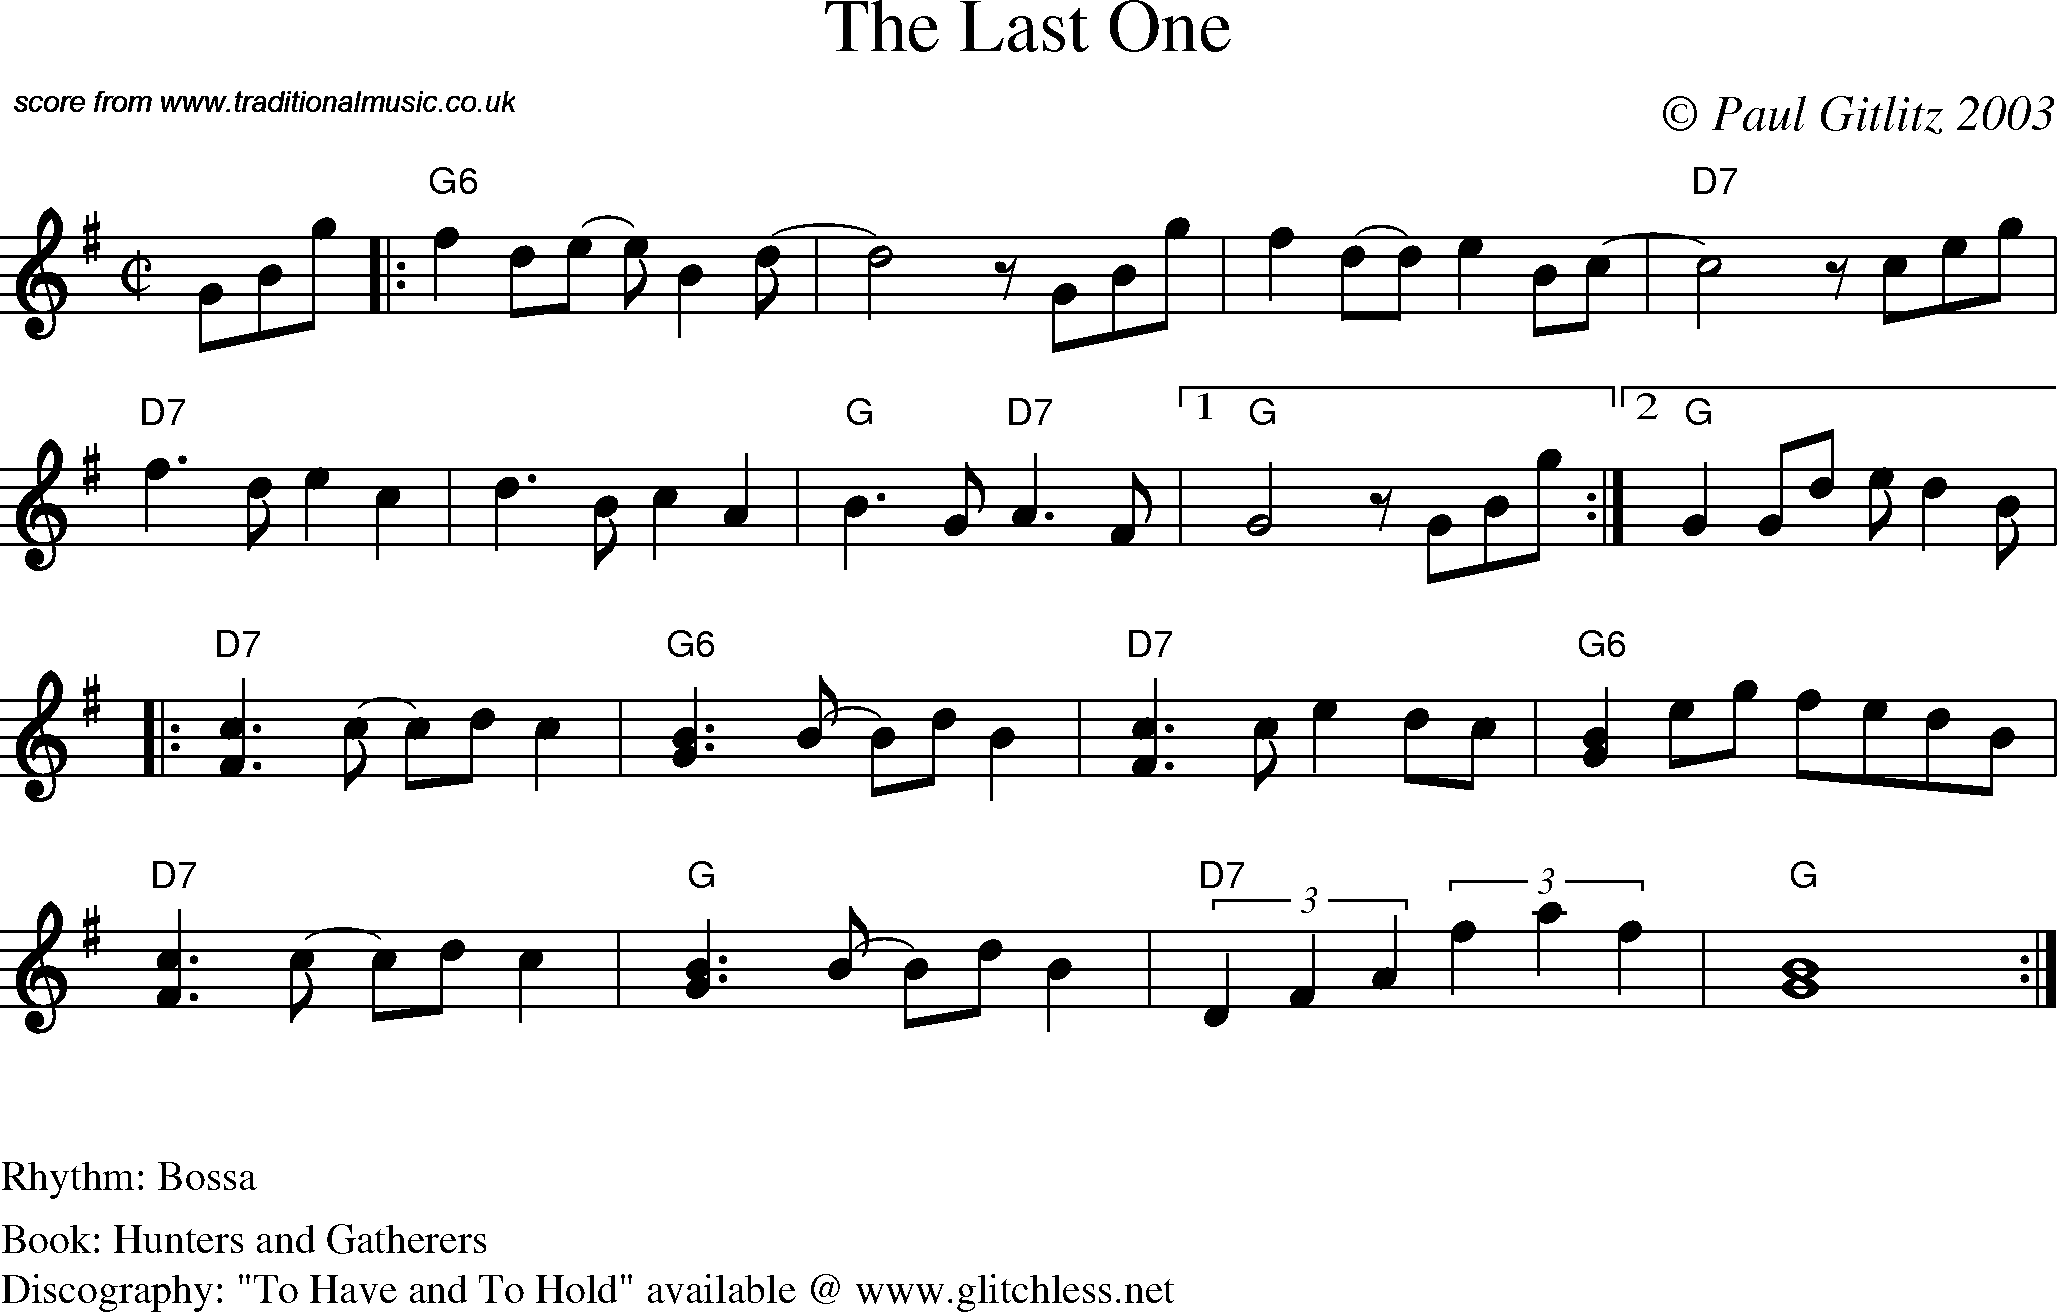 Sheet Music Score for Swing - The Last One